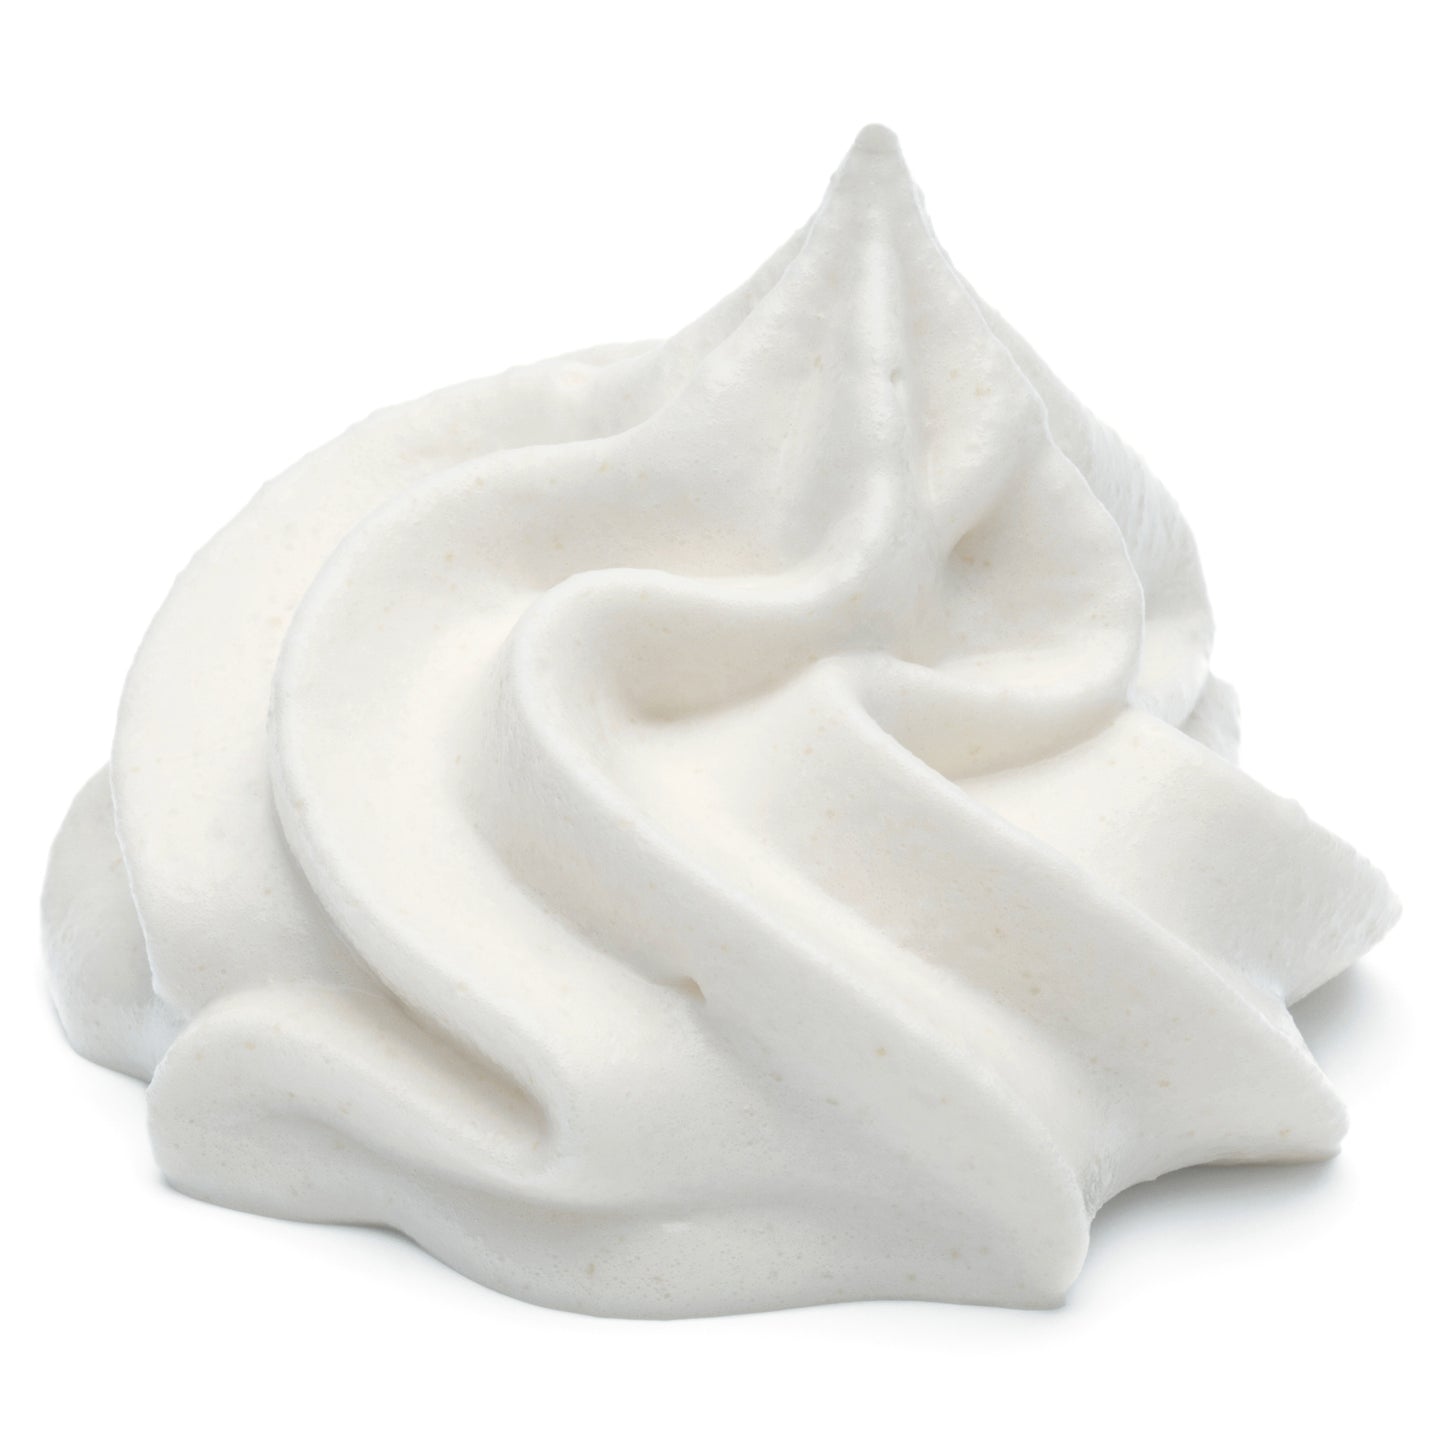 White Butter Crème Icing, 1.85 LBS.